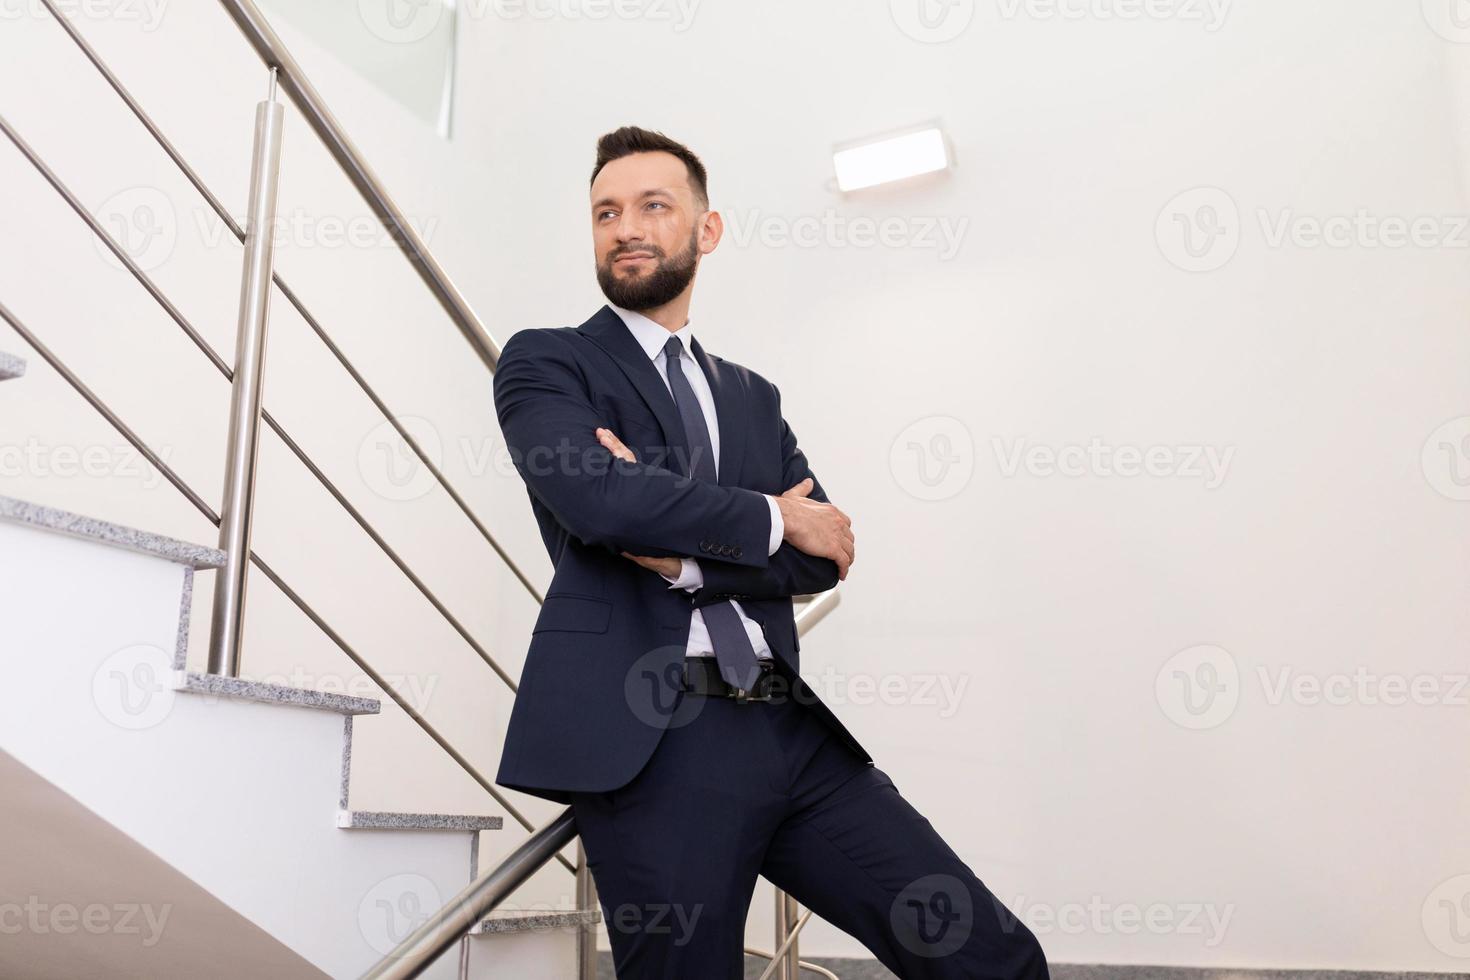 business portrait of a man in an office suit on the landing. Career growth concept photo